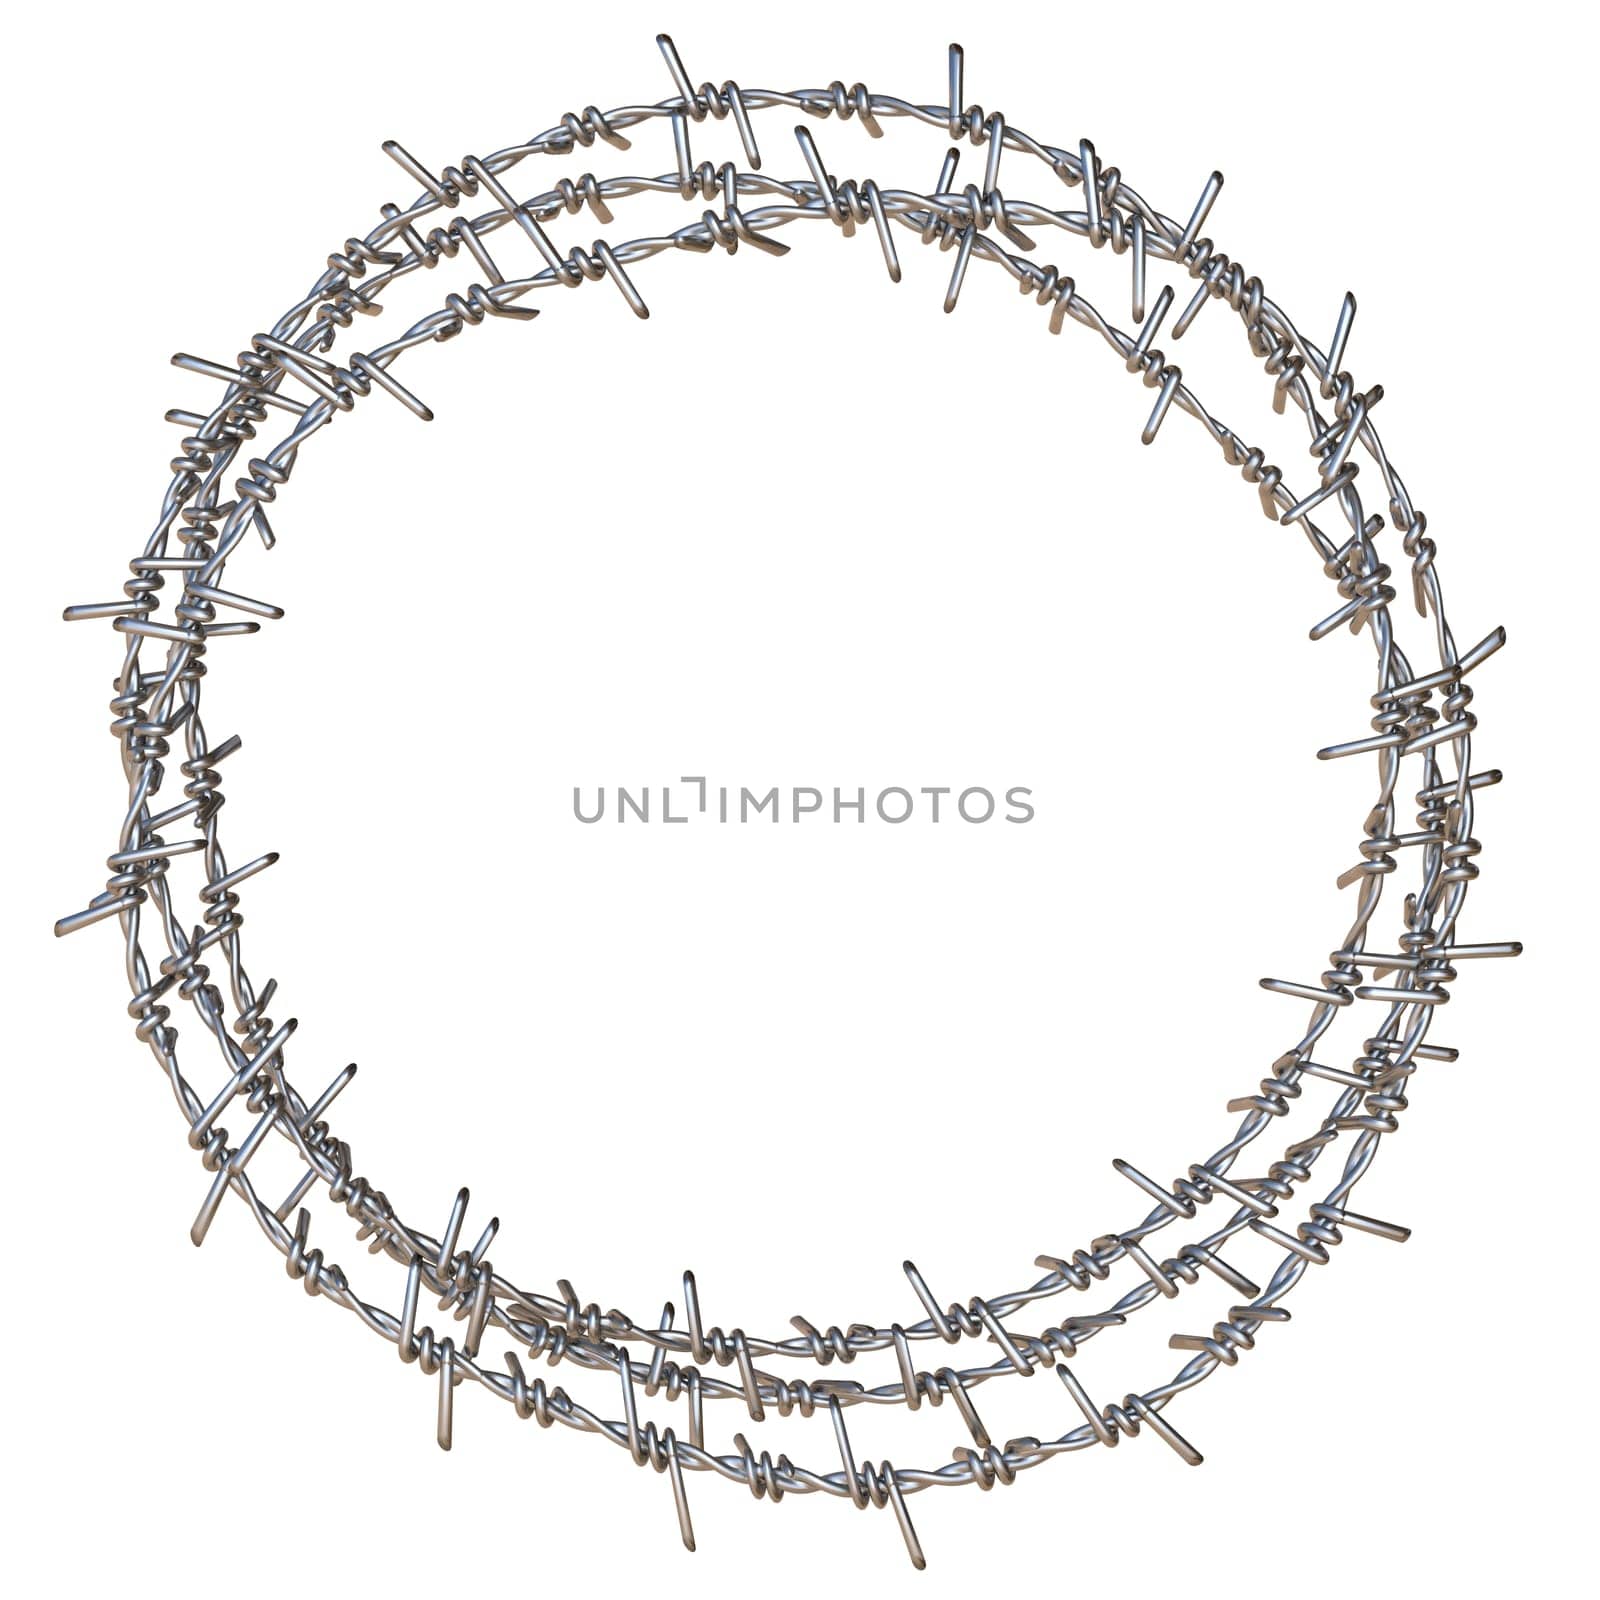 Barbed wire wreath 3D by djmilic